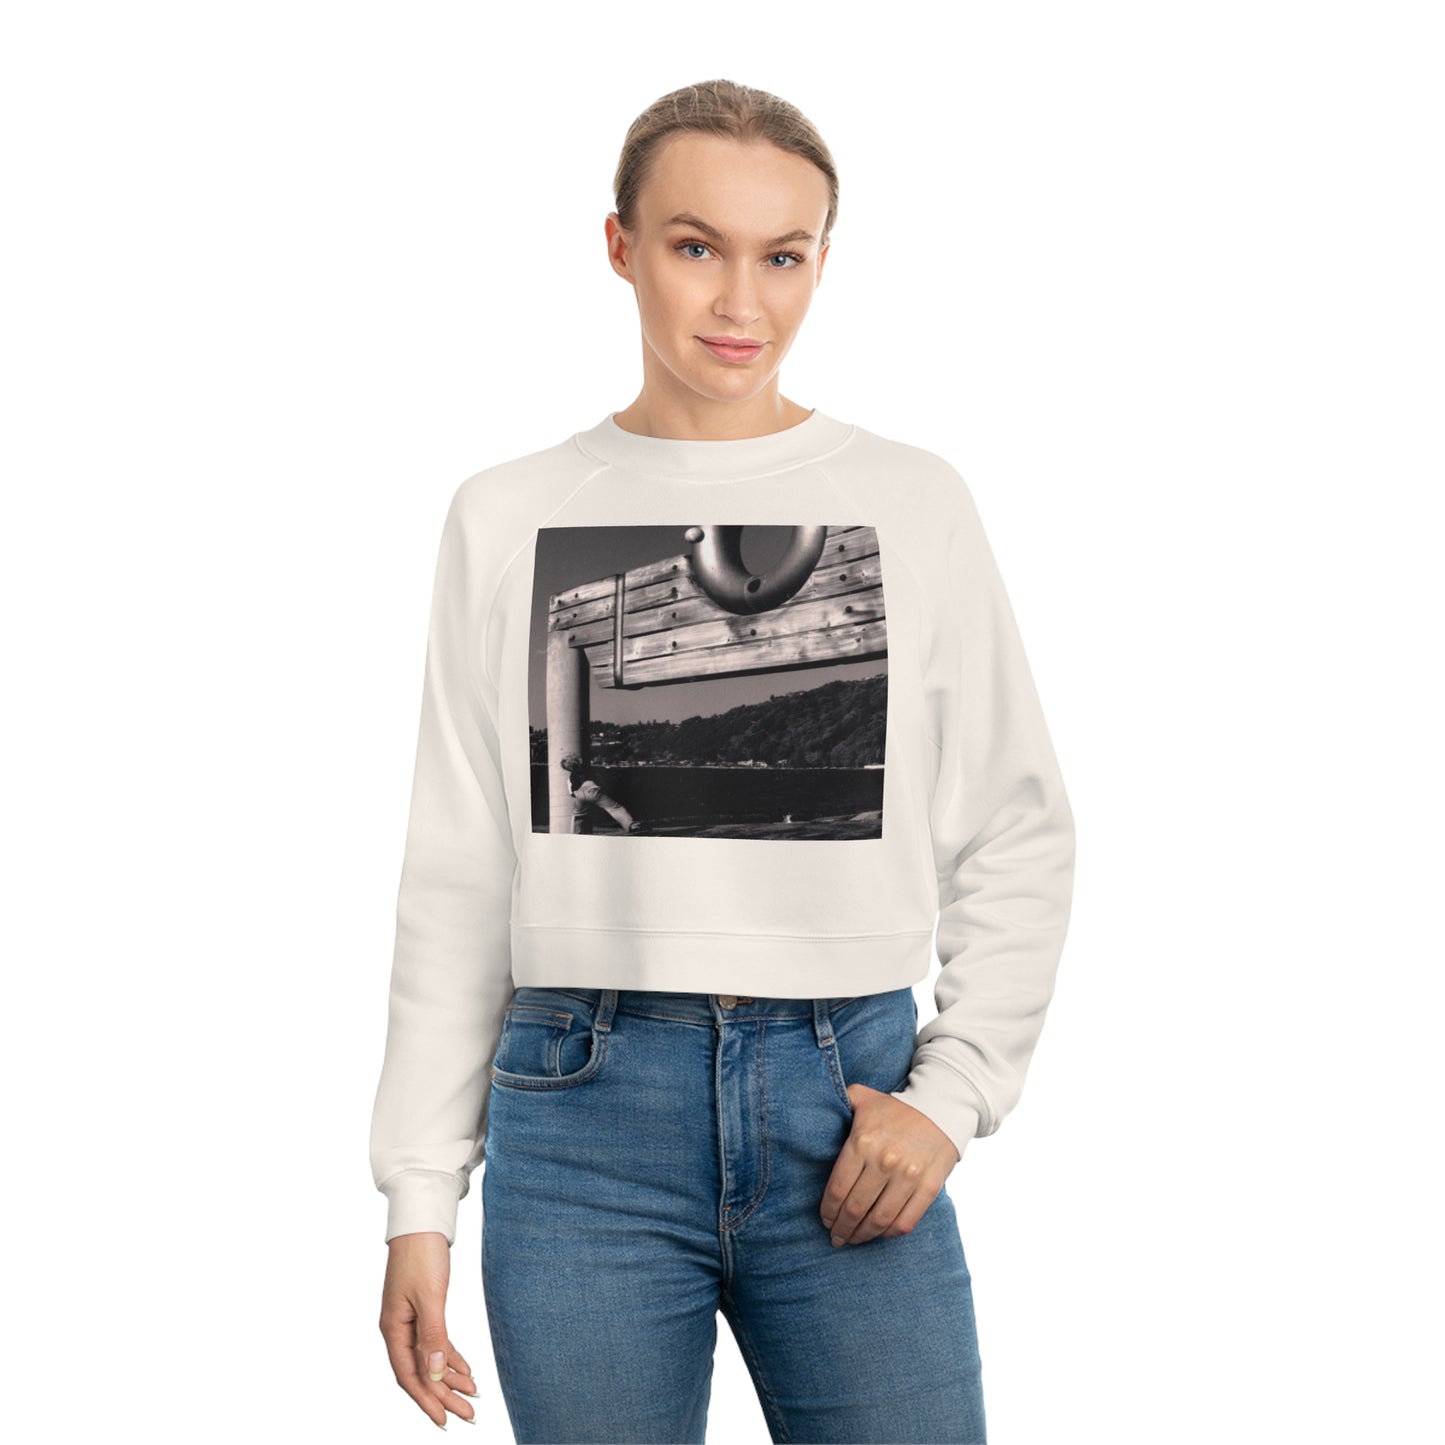 Great Throw - Women's Cropped Fleece Pullover - Fry1Productions